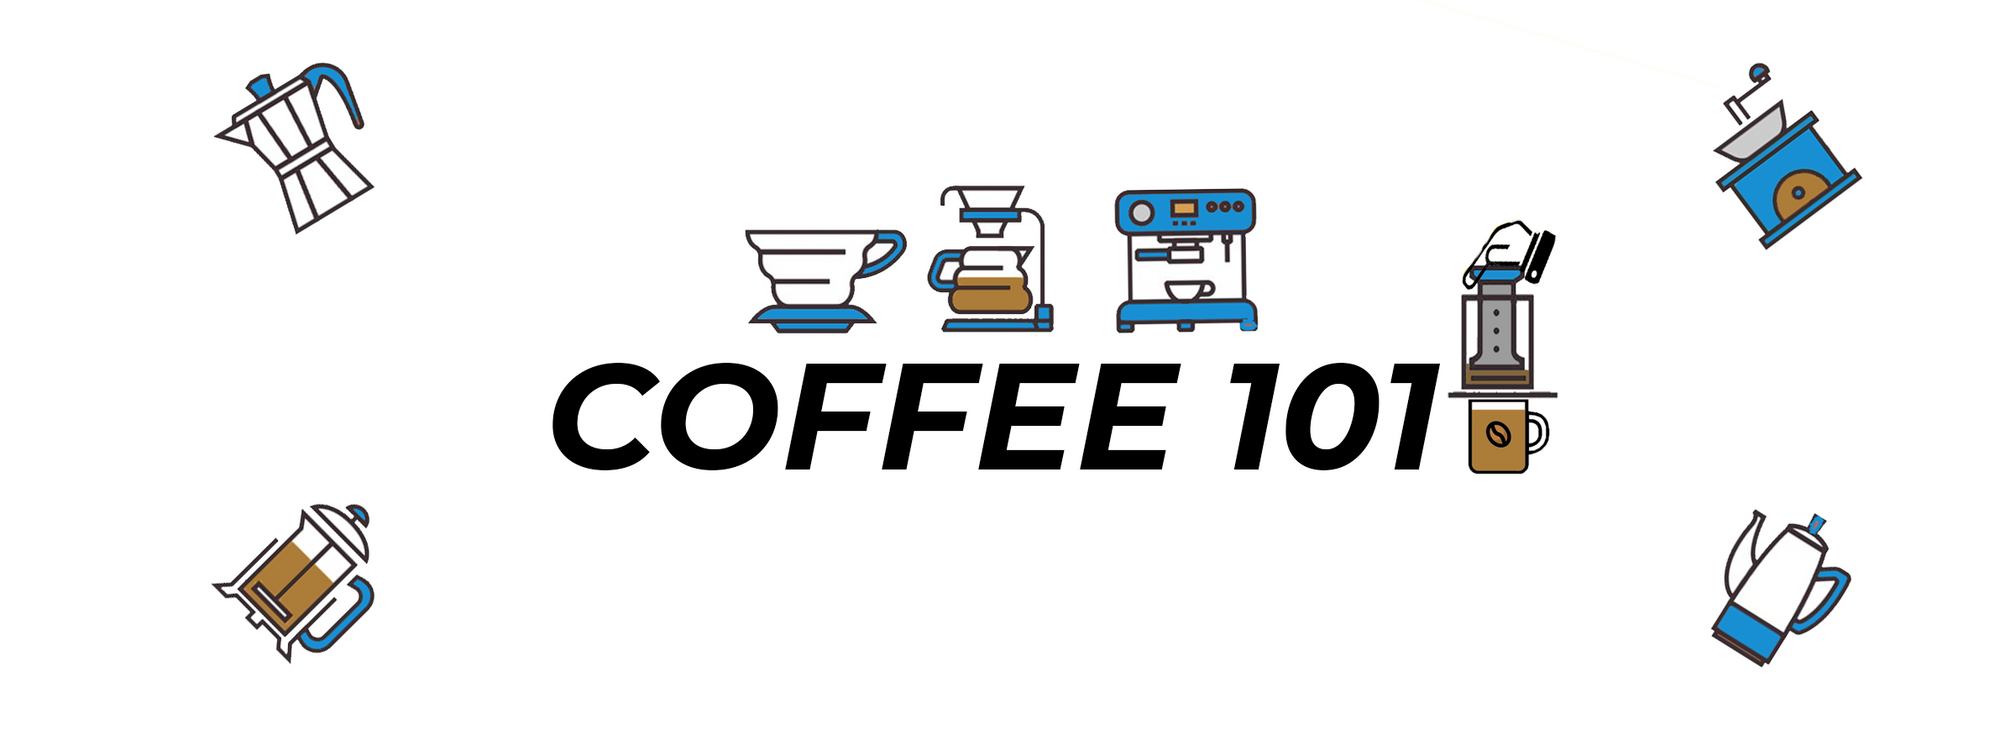 Coffee 101 - A comprehensive guide to all thing coffee